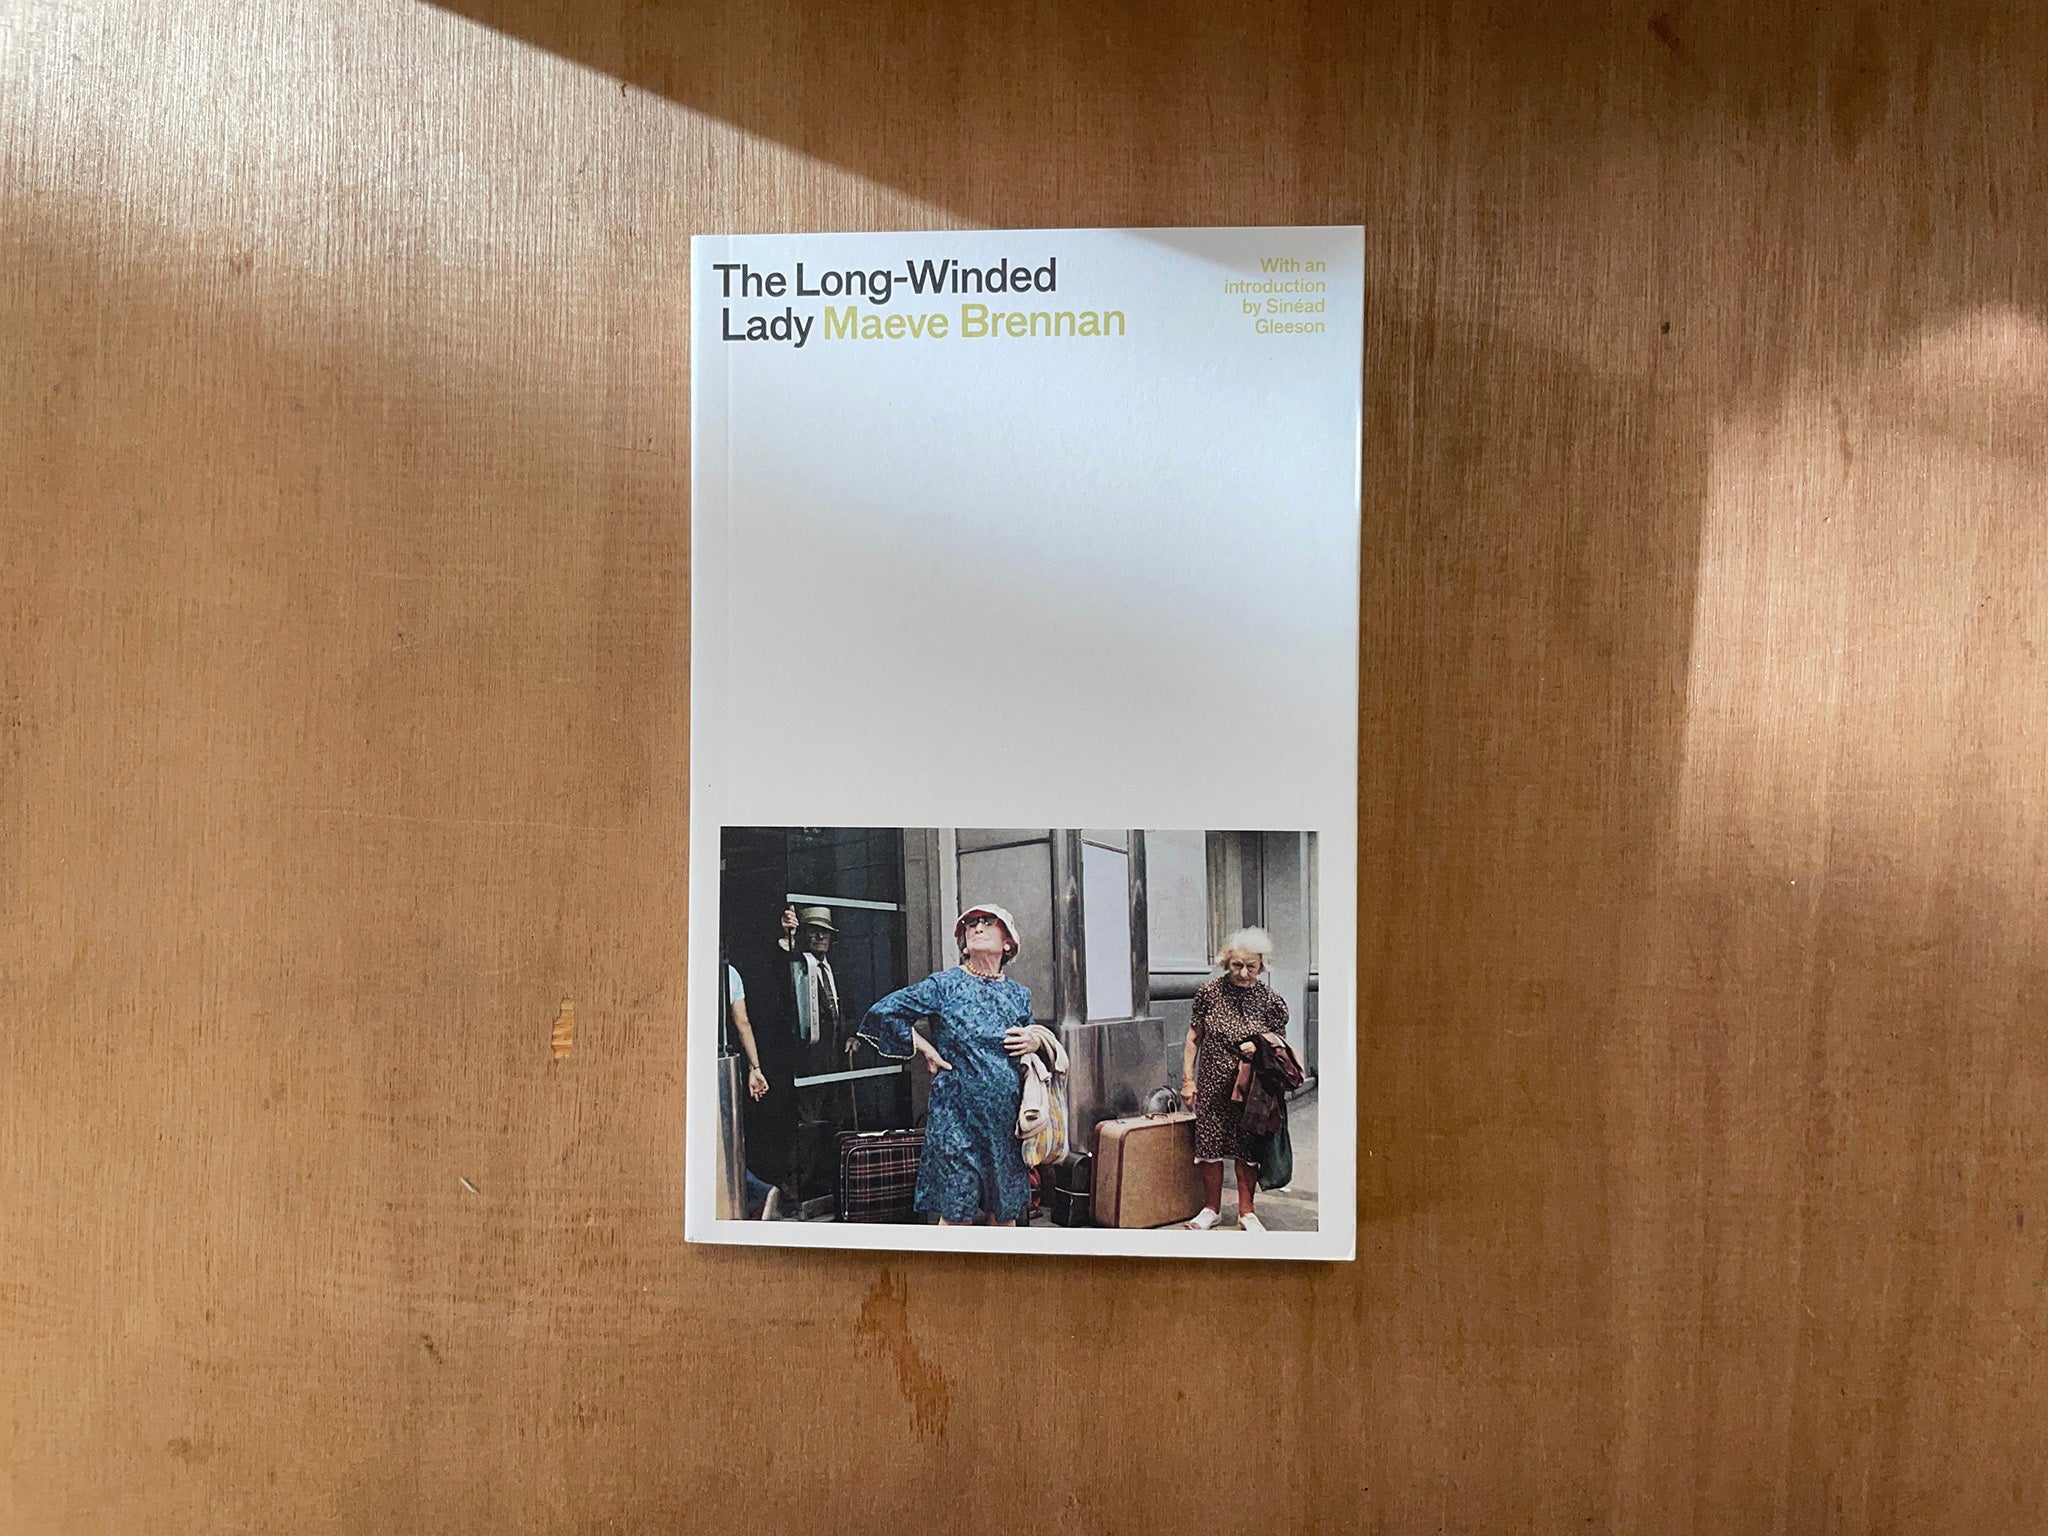 THE LONG-WINDED LADY by Maeve Brennan